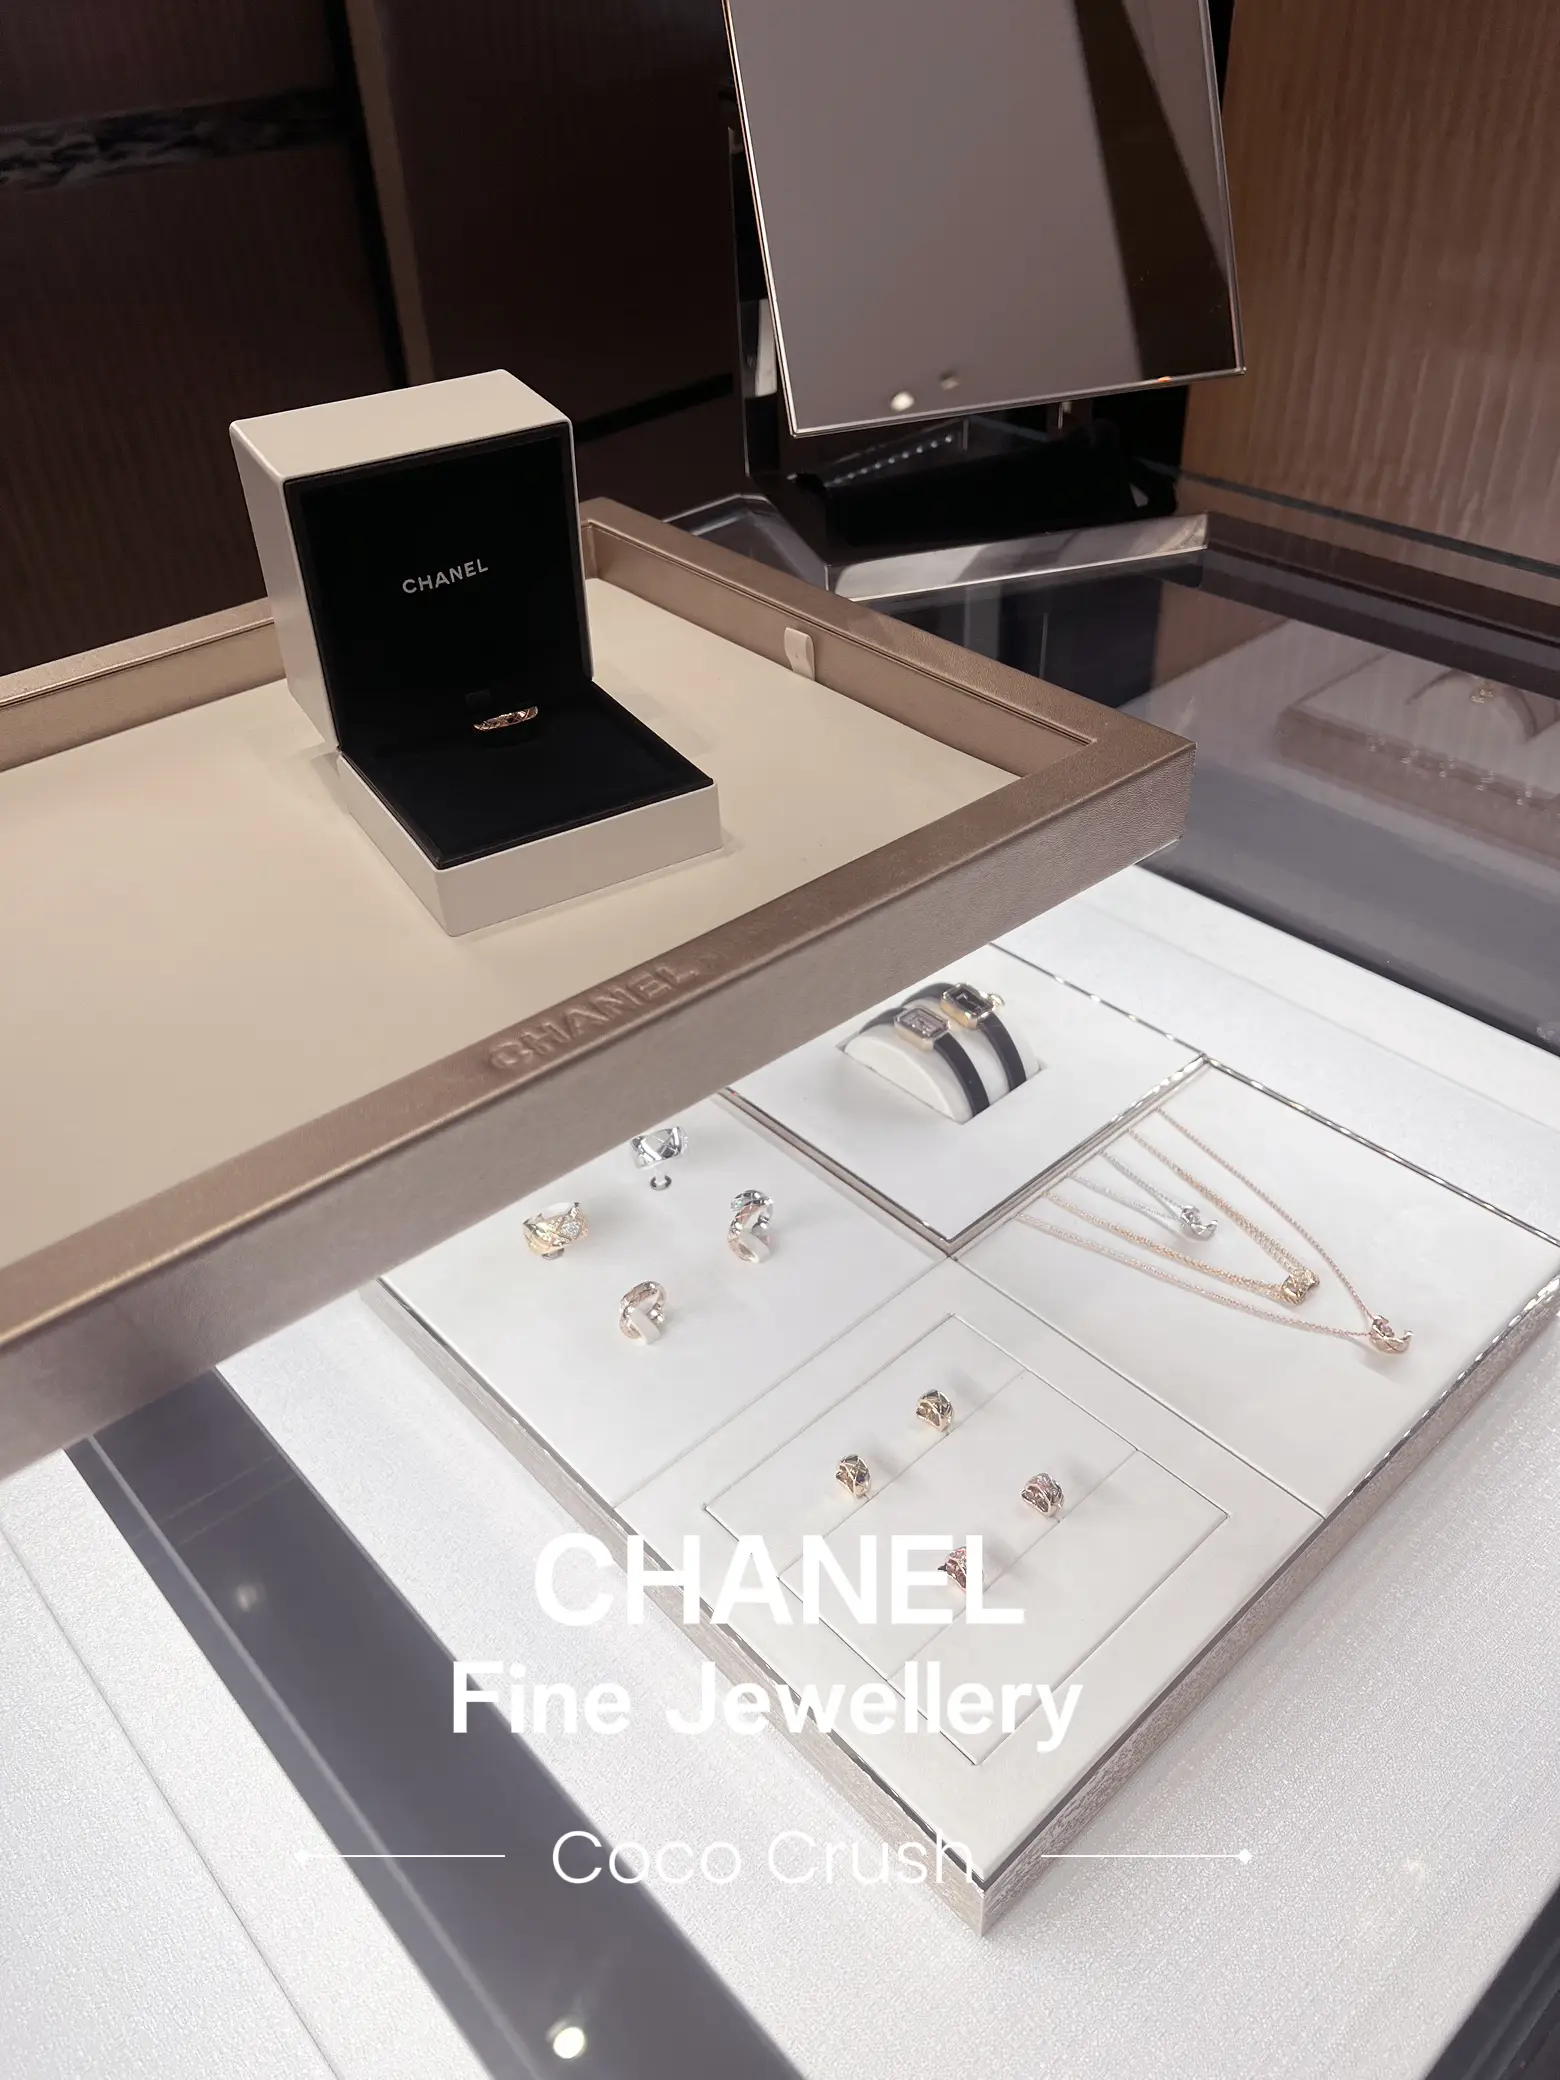 CHANEL - Fine Jewellery (Coco Crush), Gallery posted by Supassara